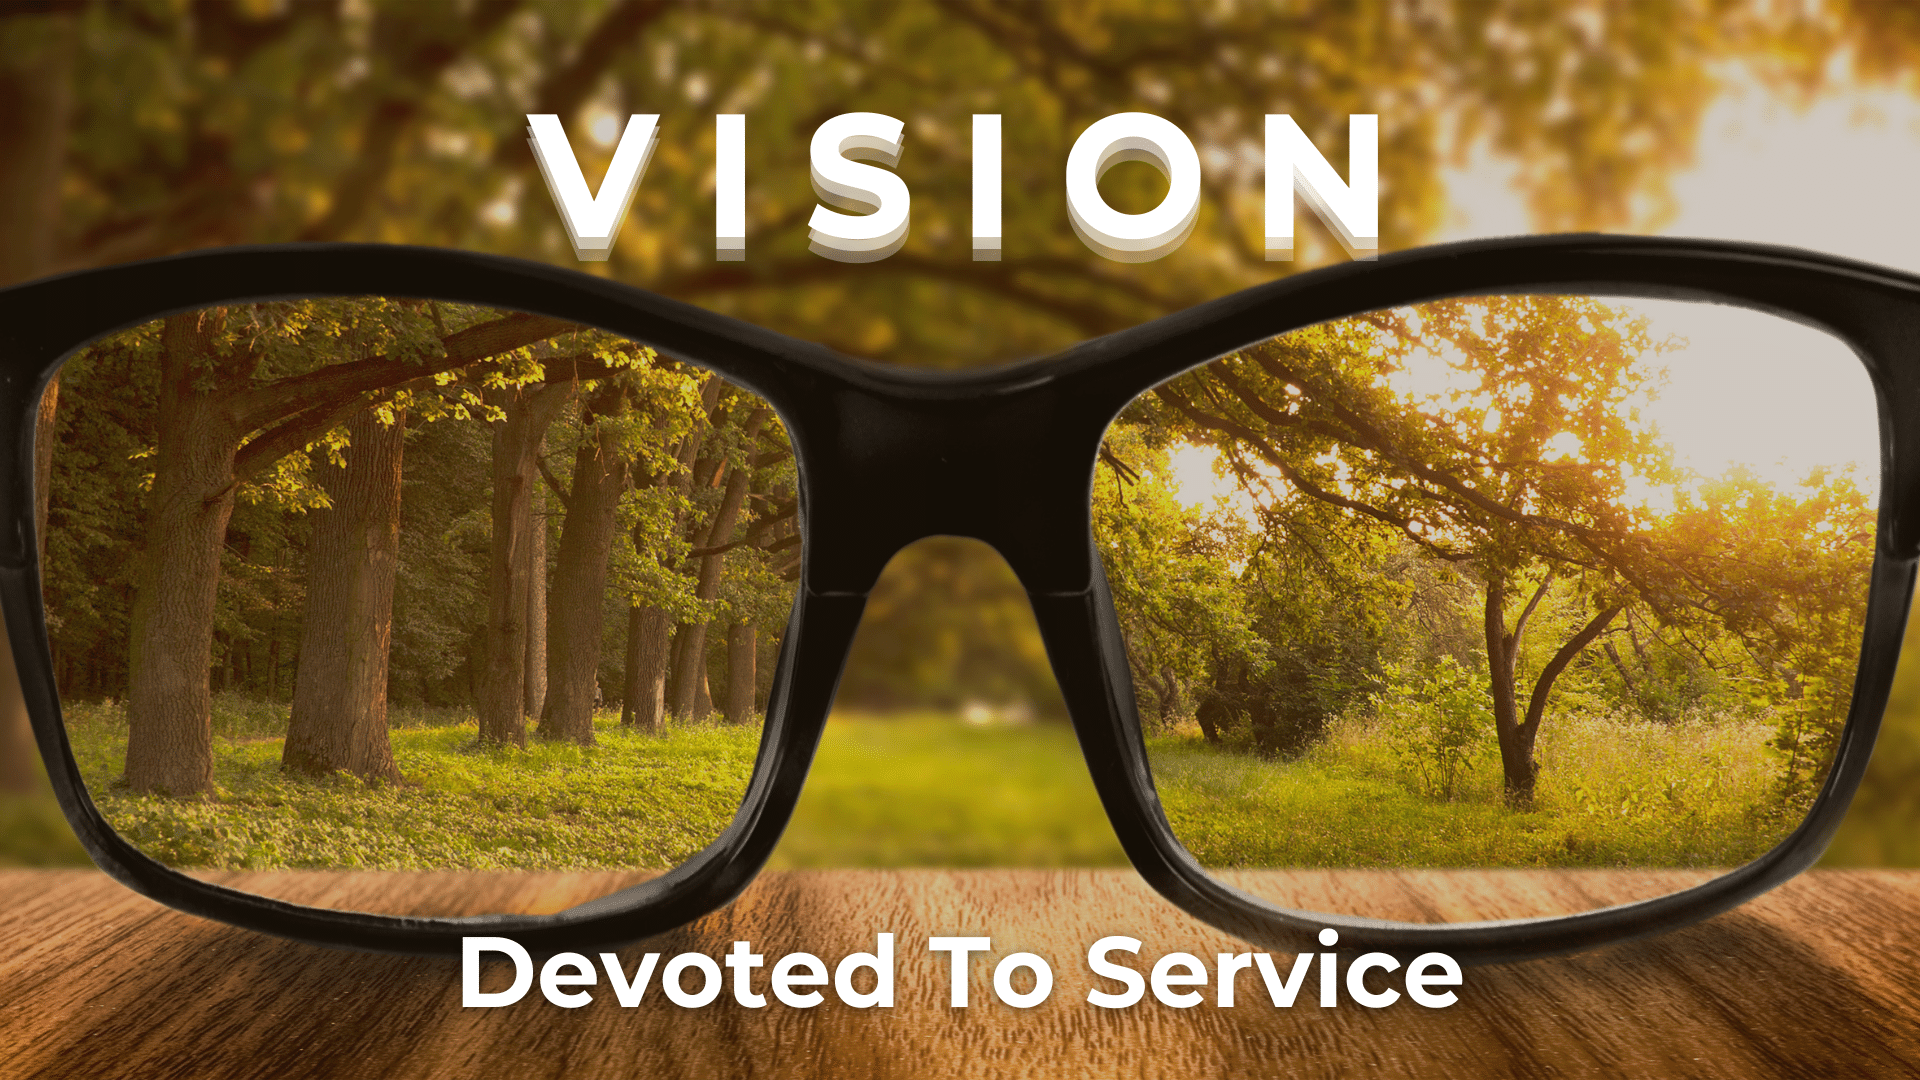 Vision: Devoted To Service